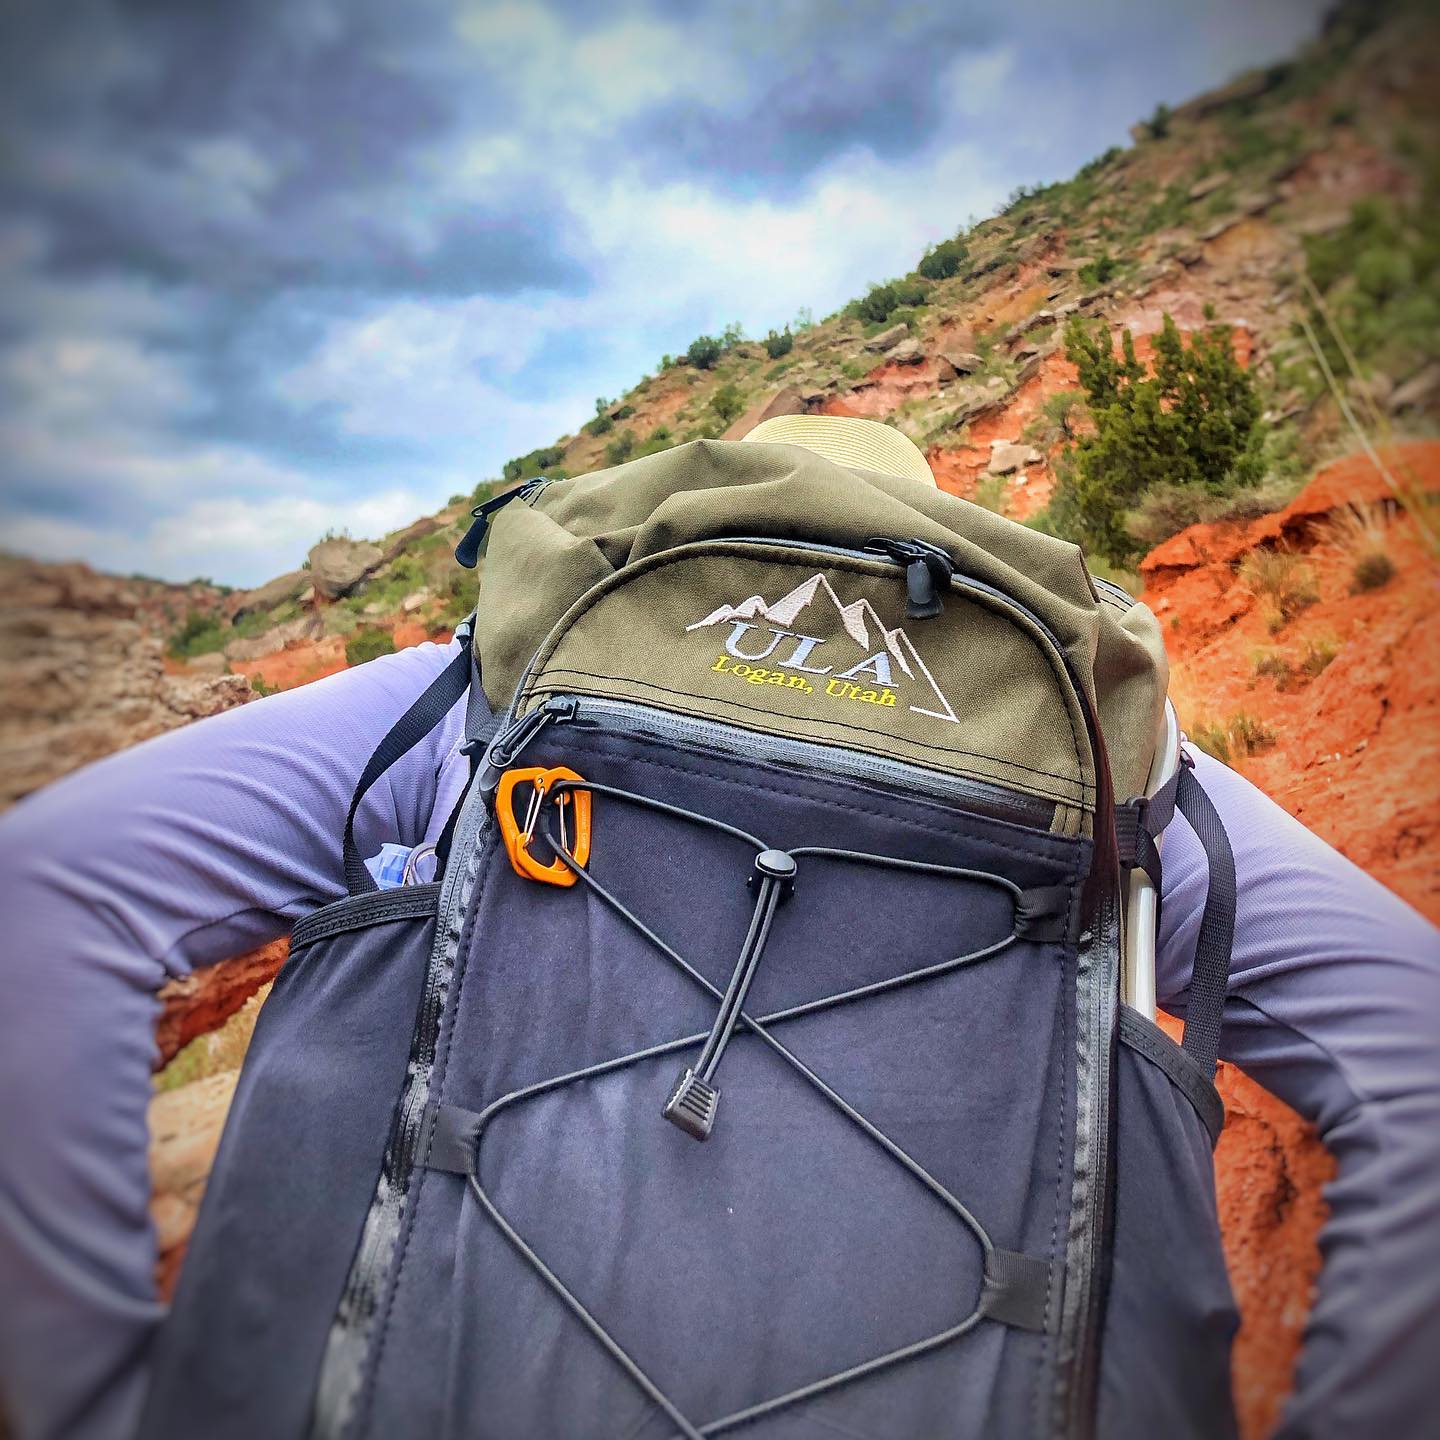 One Pack to Rule Them All? The ULA Dragonfly Backpack